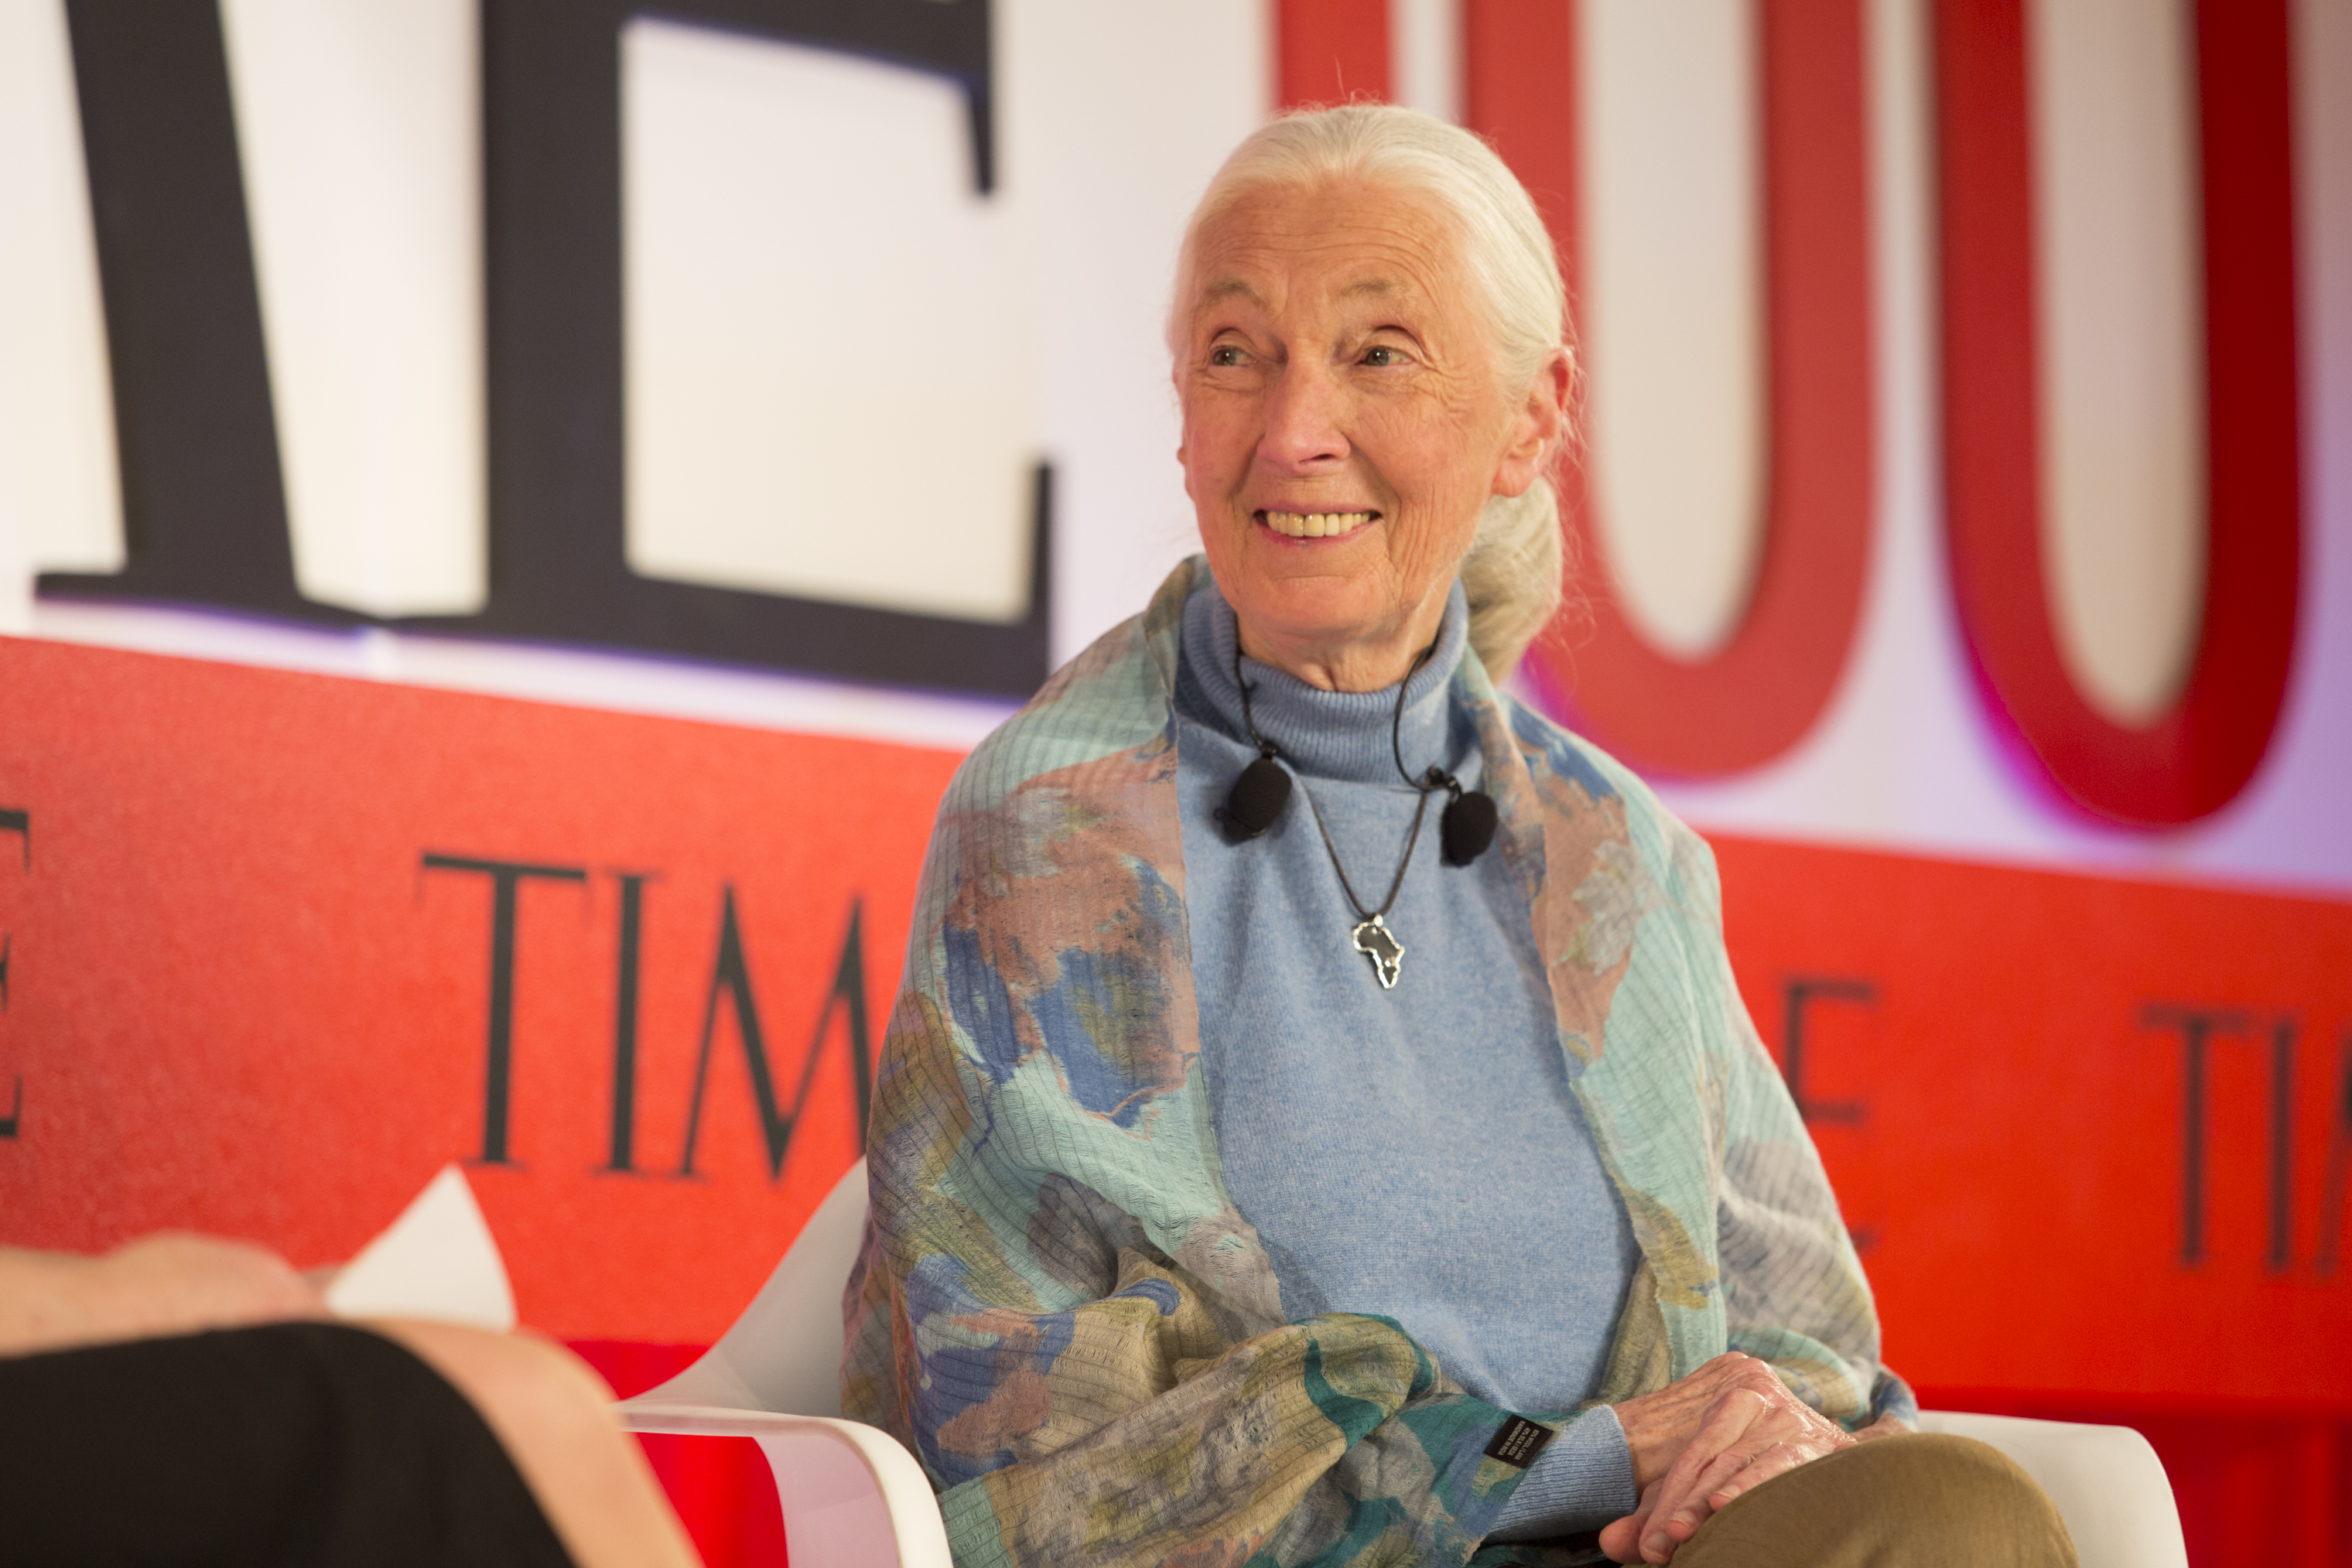 Primatologist Jane Goodall on a panel about Protecting Our Planet at the TIME100 Summit in New York, on April 23, 2019.